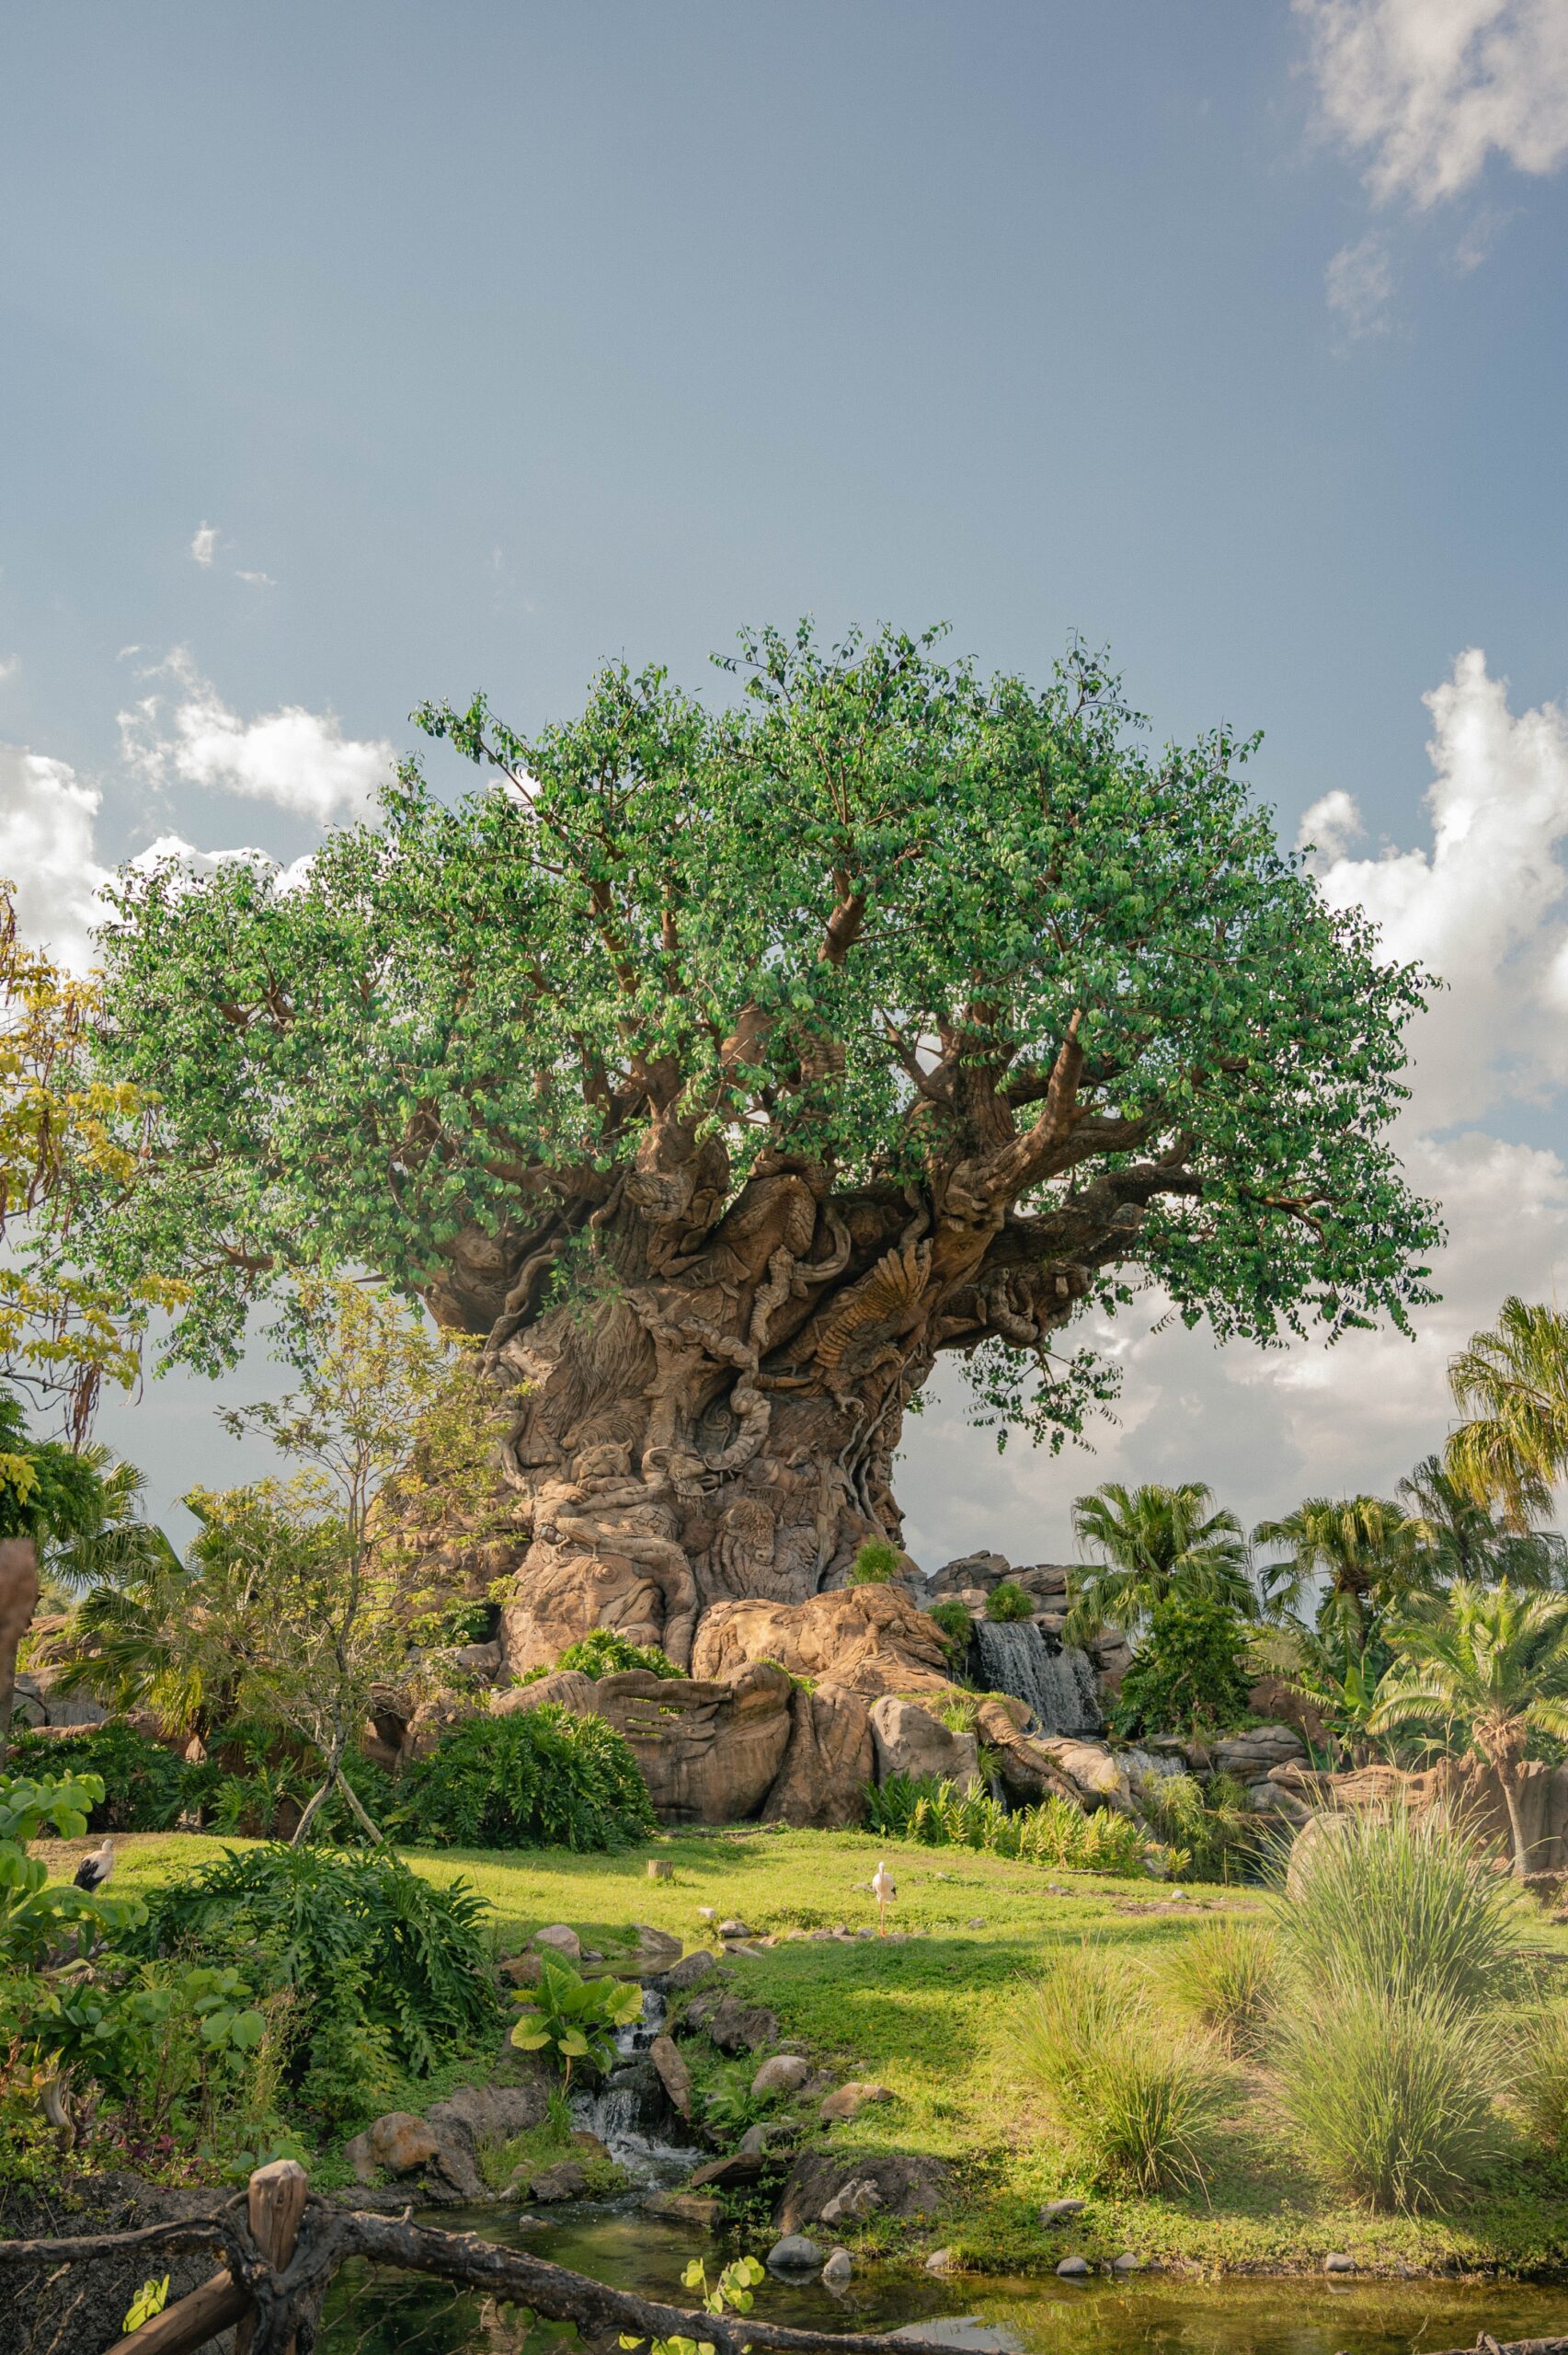 Explore your wild side at Animal Kingdom